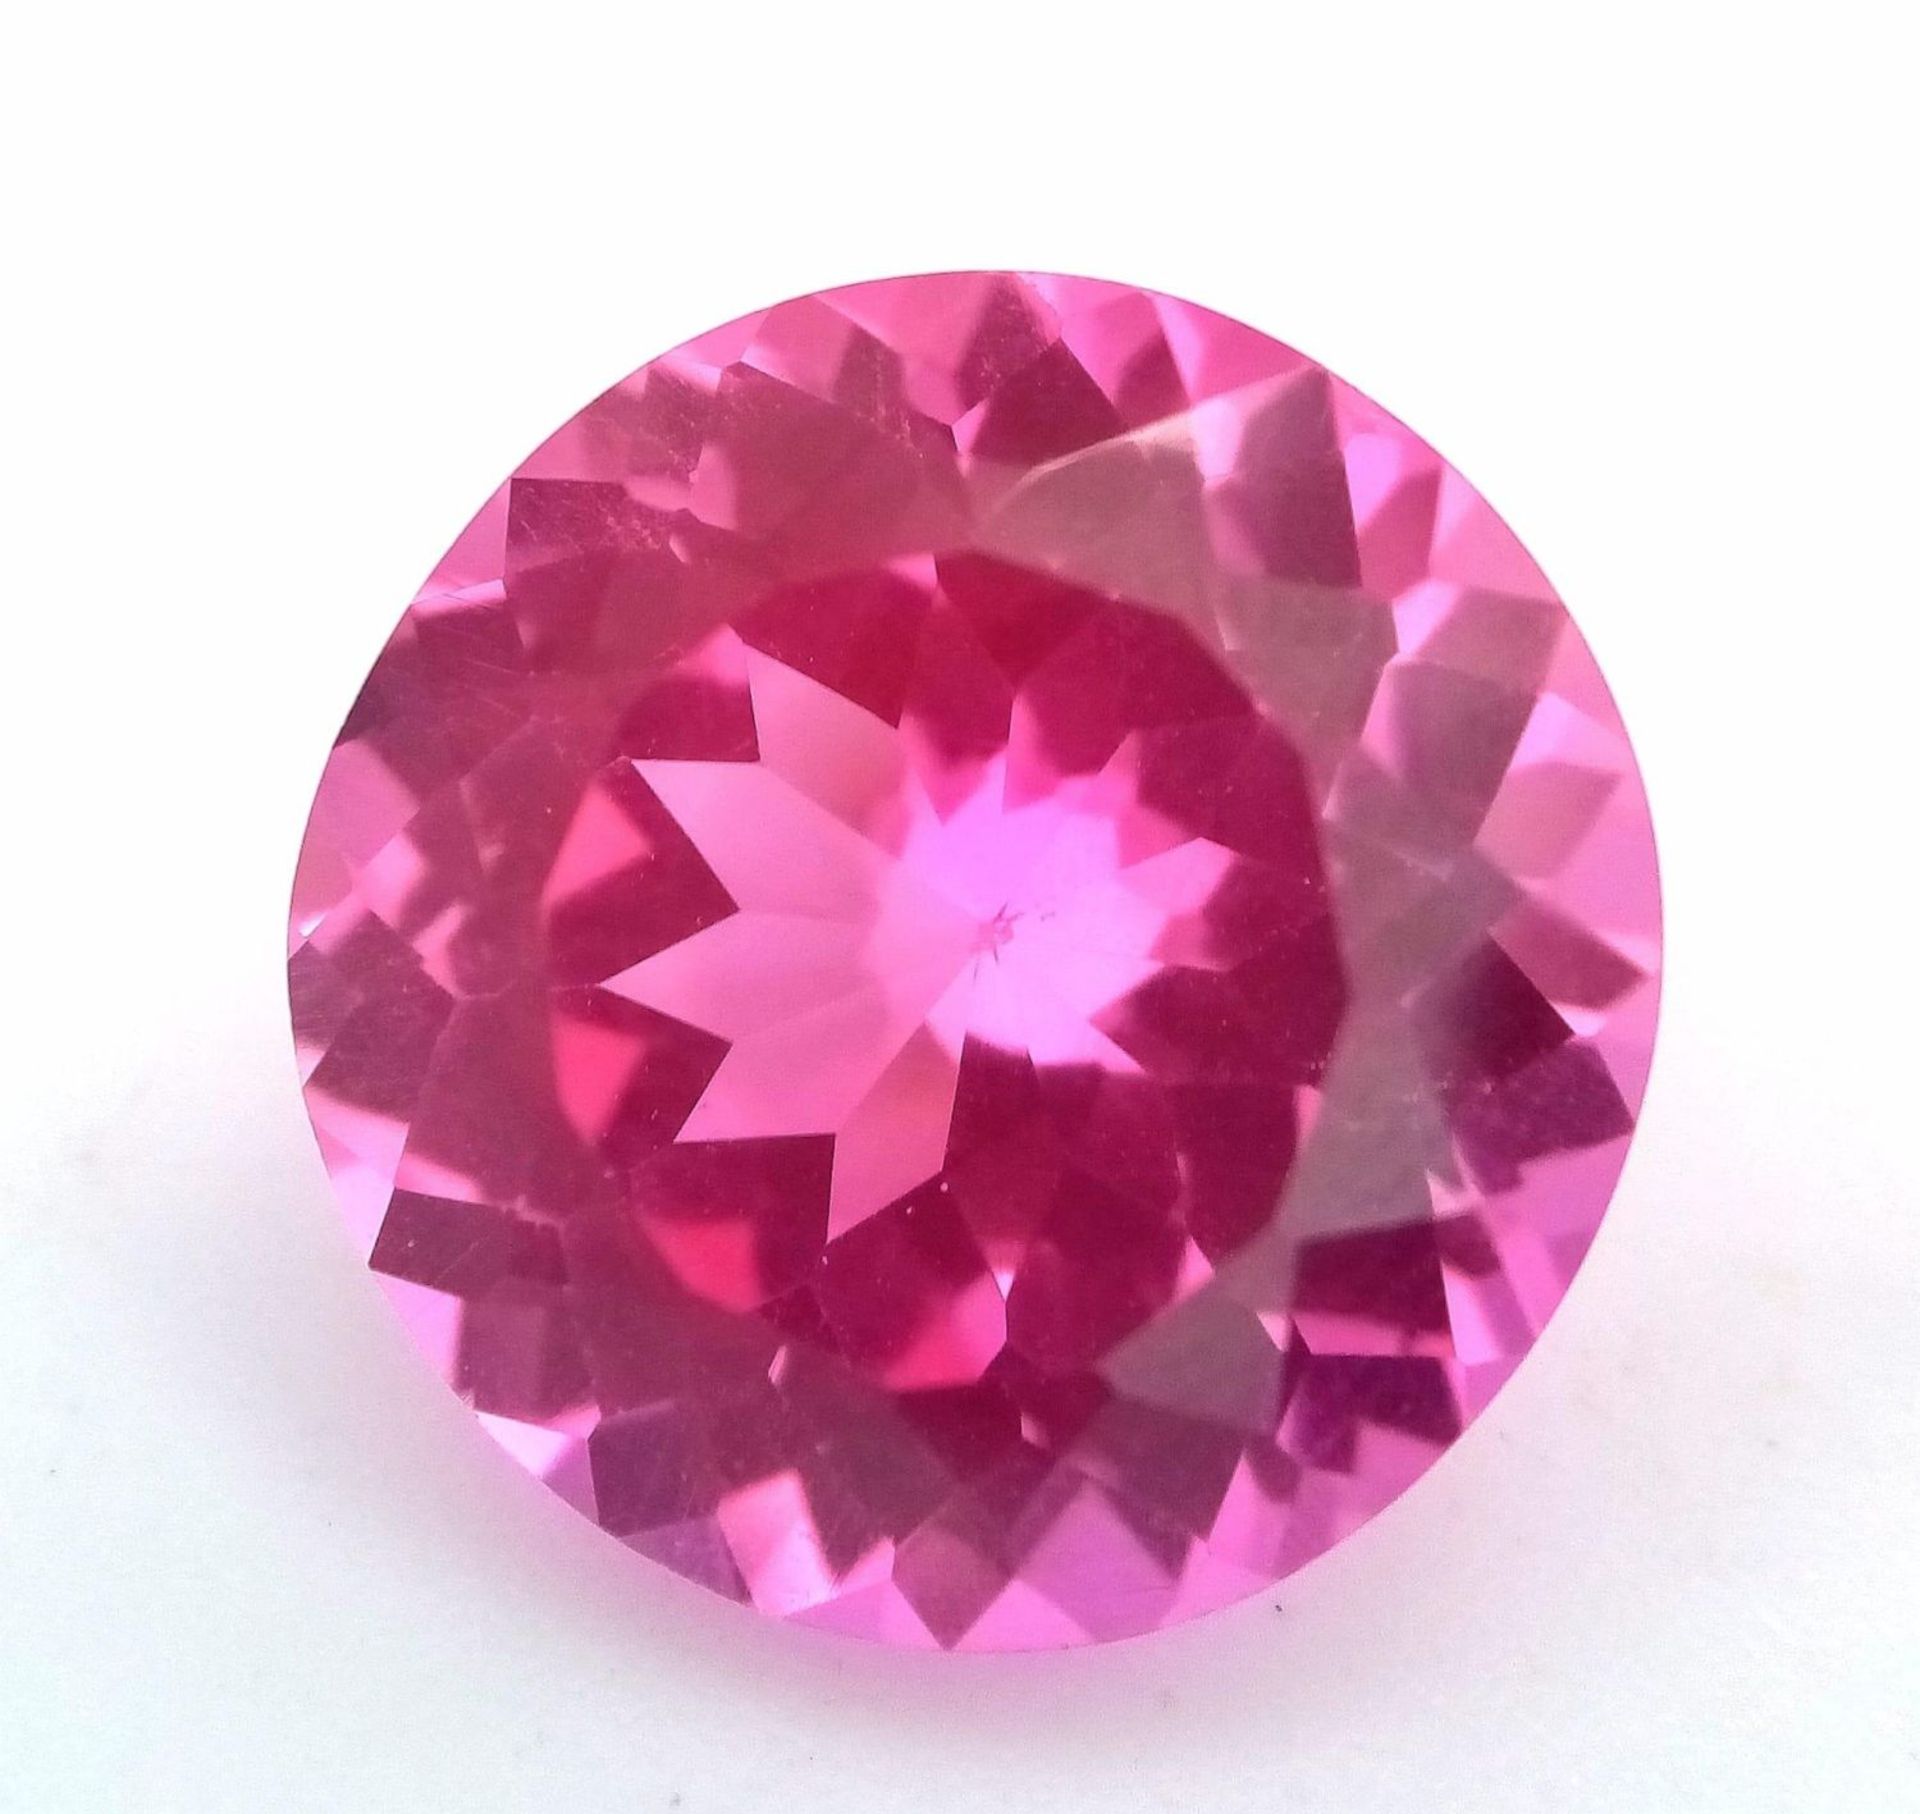 A Beautiful 18ct Pink Kunzite Gemstone. Round cut. No visible marks or inclusions. No certificate so - Bild 3 aus 4